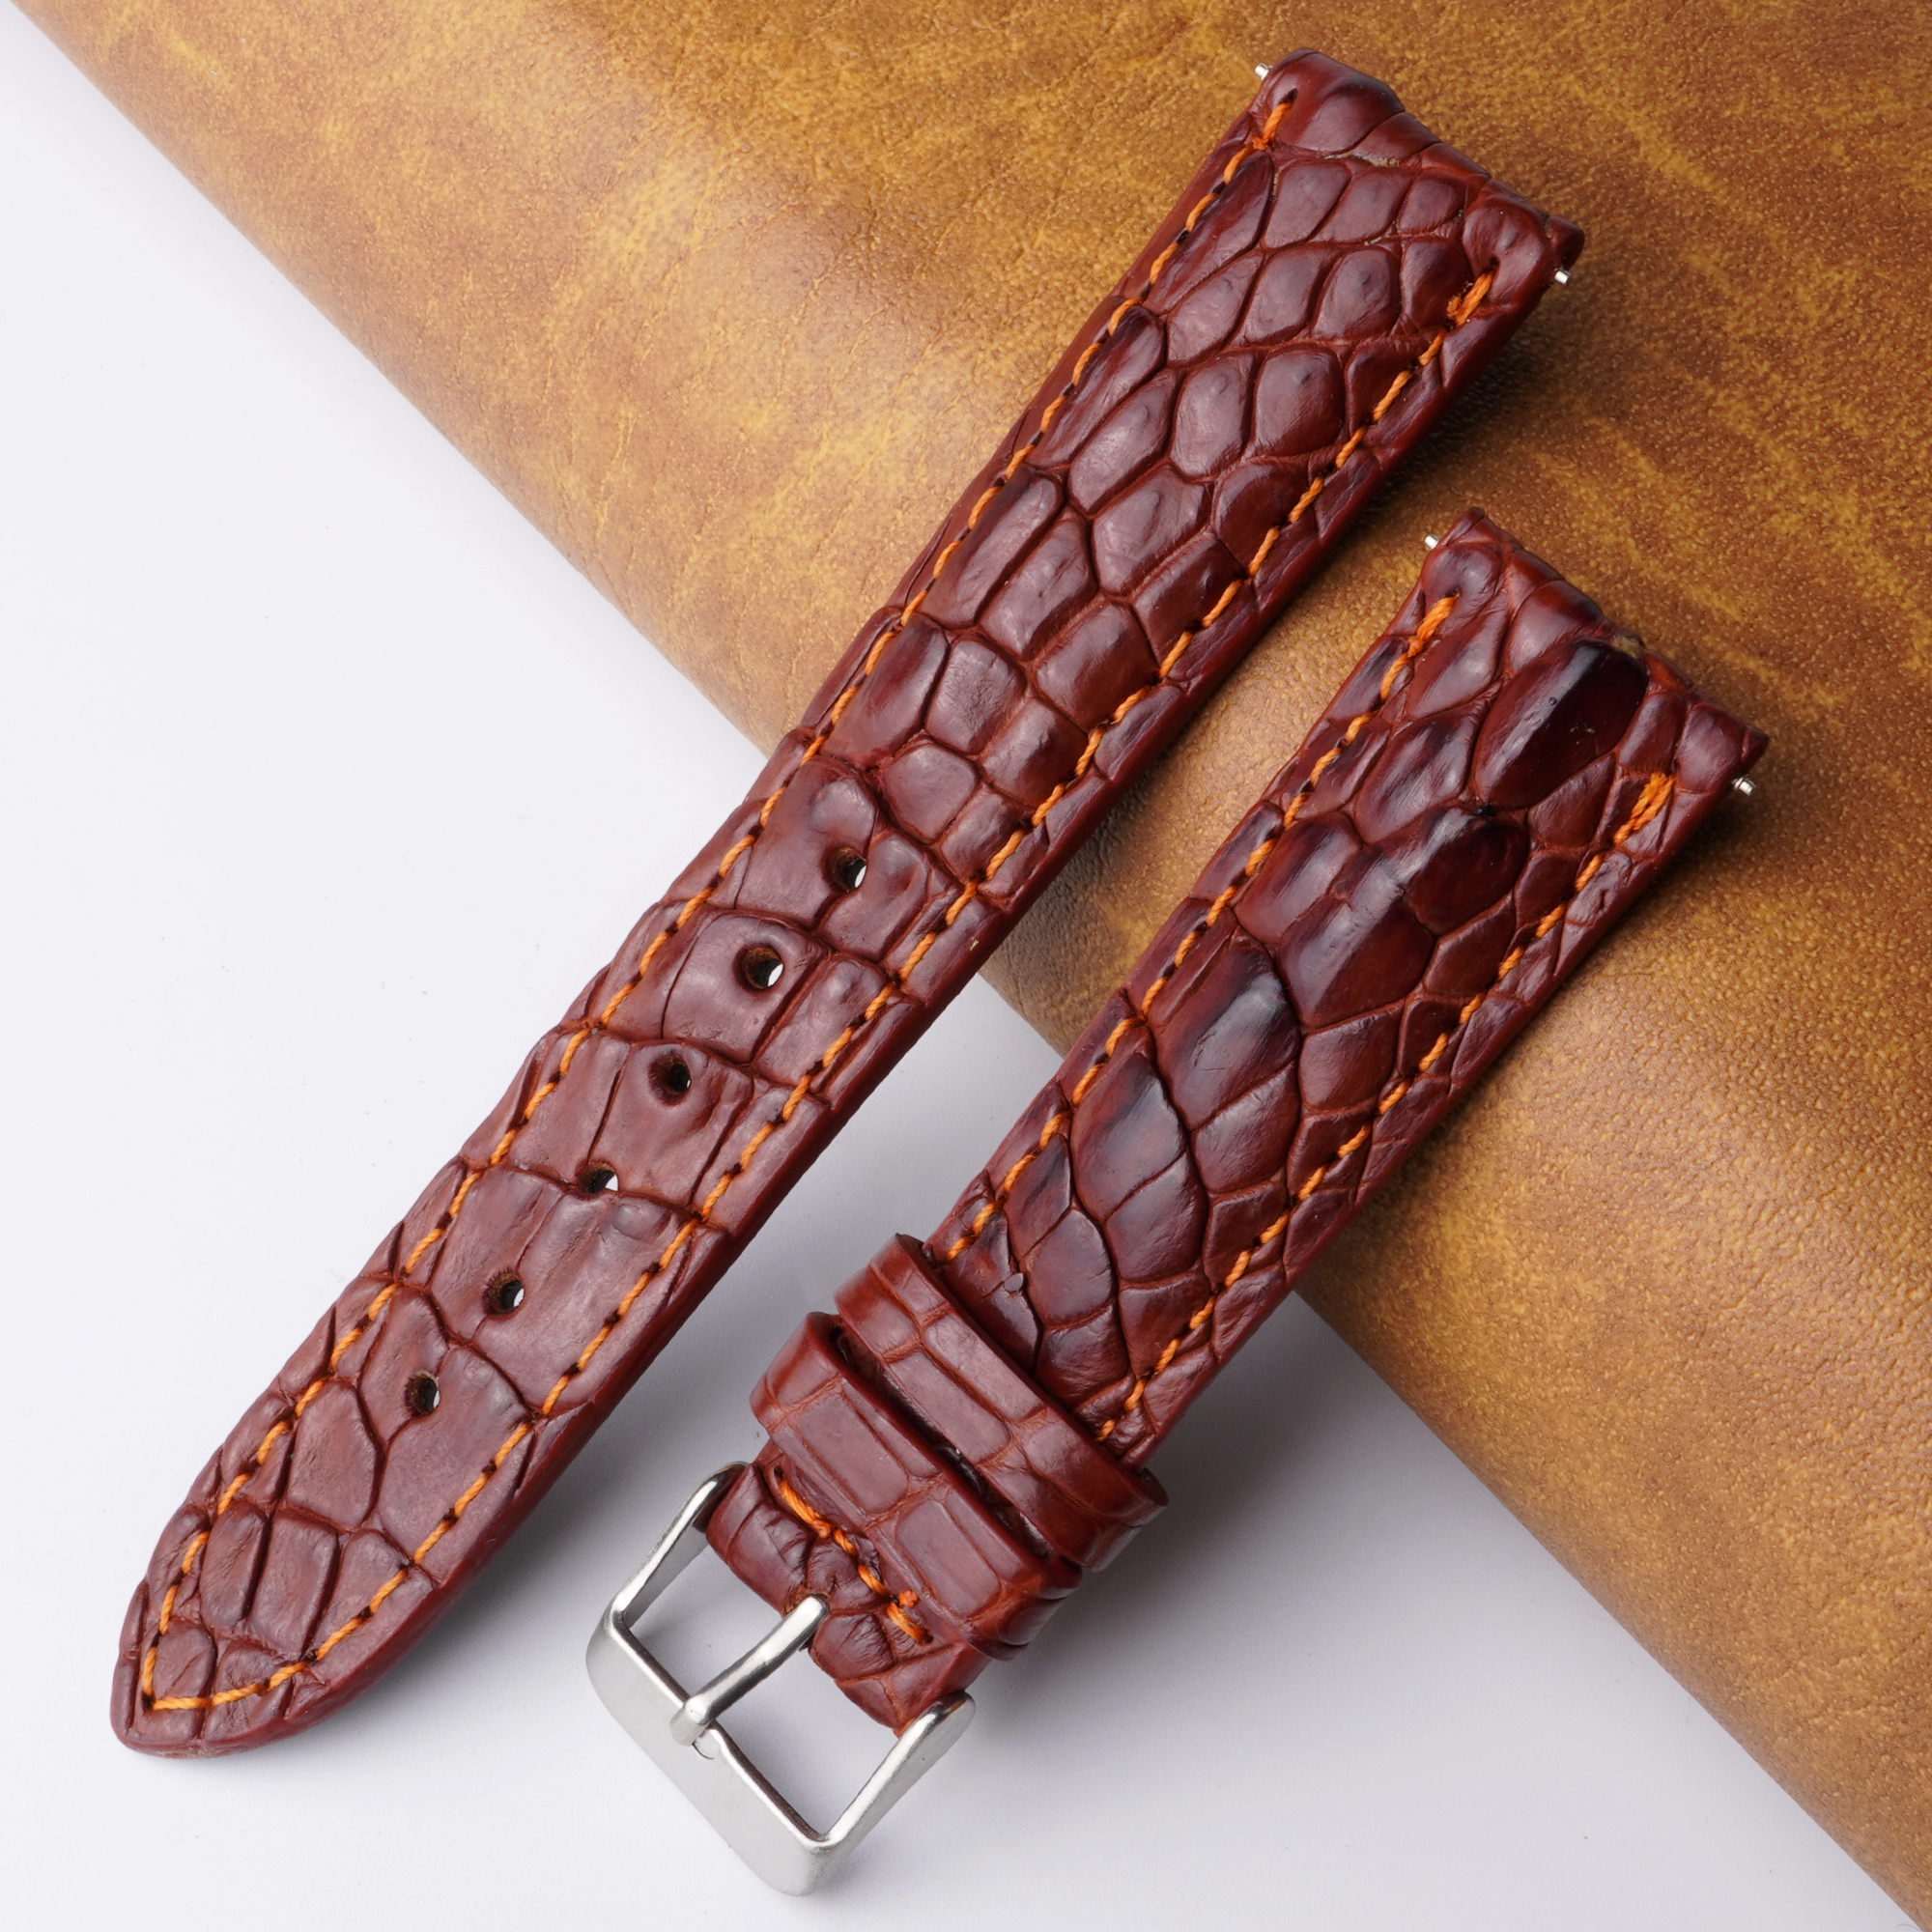 20mm Brown Unique Pattern Alligator Leather Watch Band For Men DH-227L